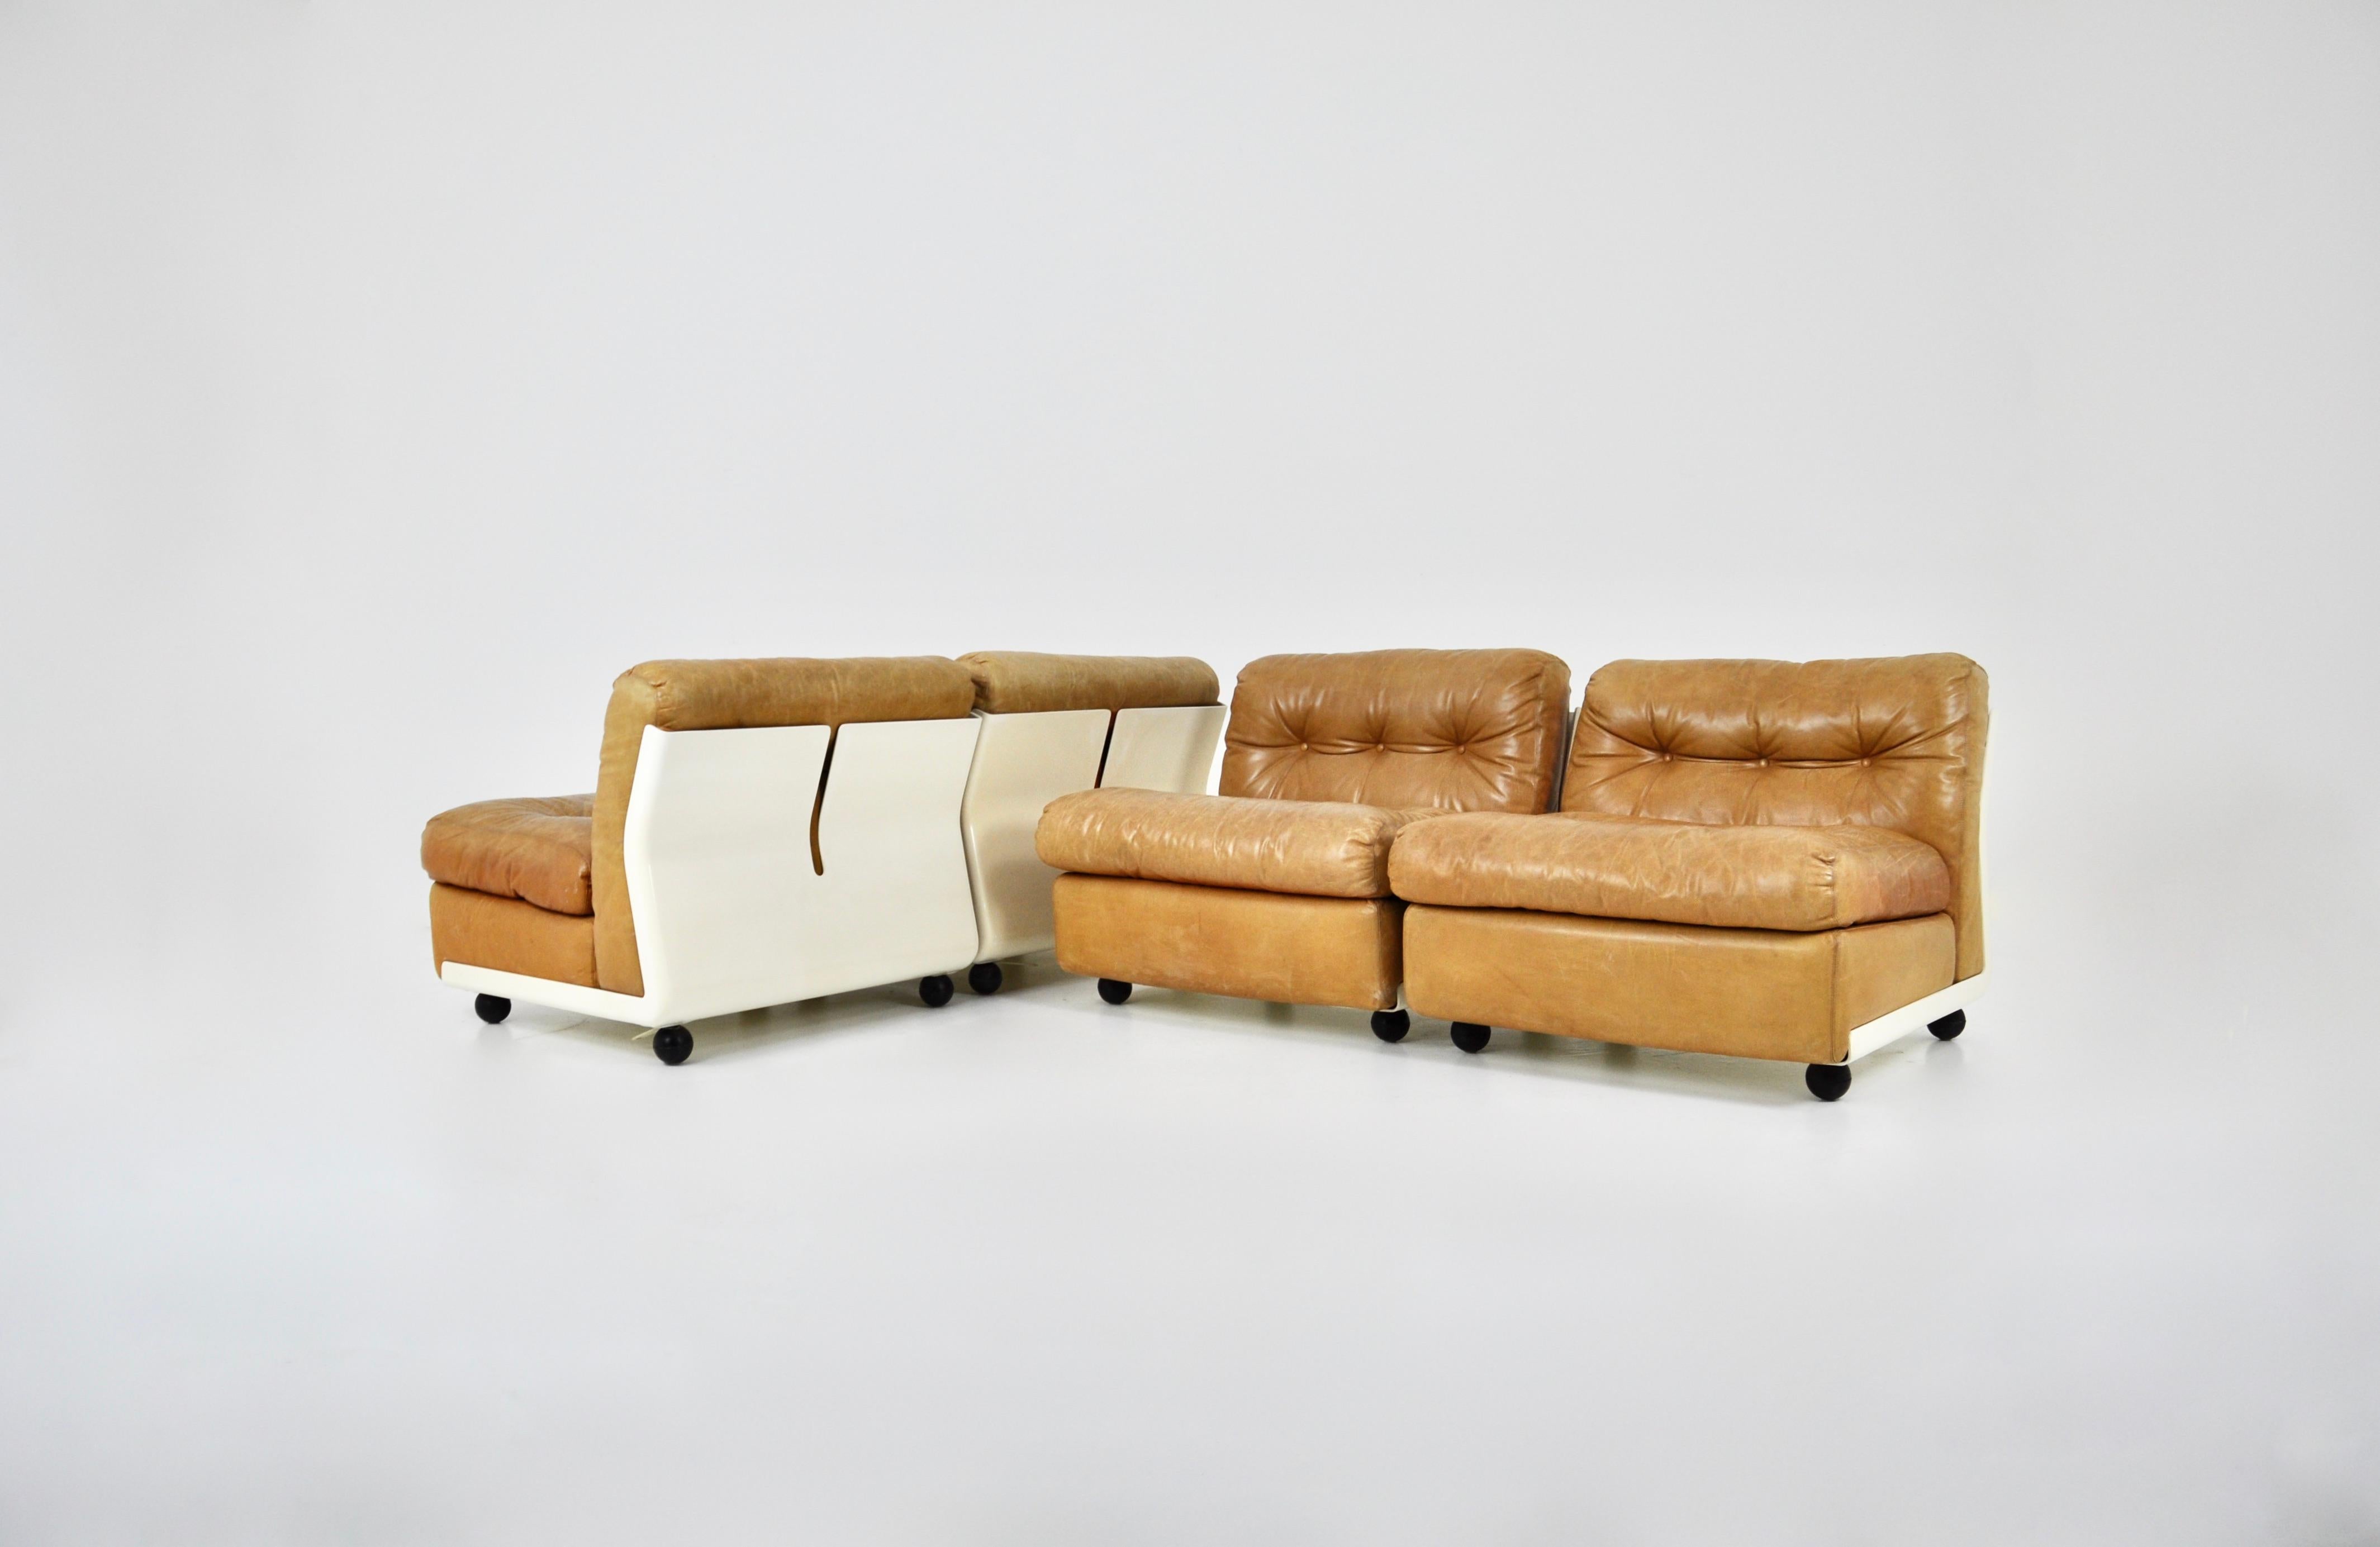 Set of 4 brown leather armchairs with fibreglass shell. Designed by Mario Bellini for C&B Italia. Seat height: 43 cm. Stamped C&B Italia. They can be attached together. Wear due to time and age.
